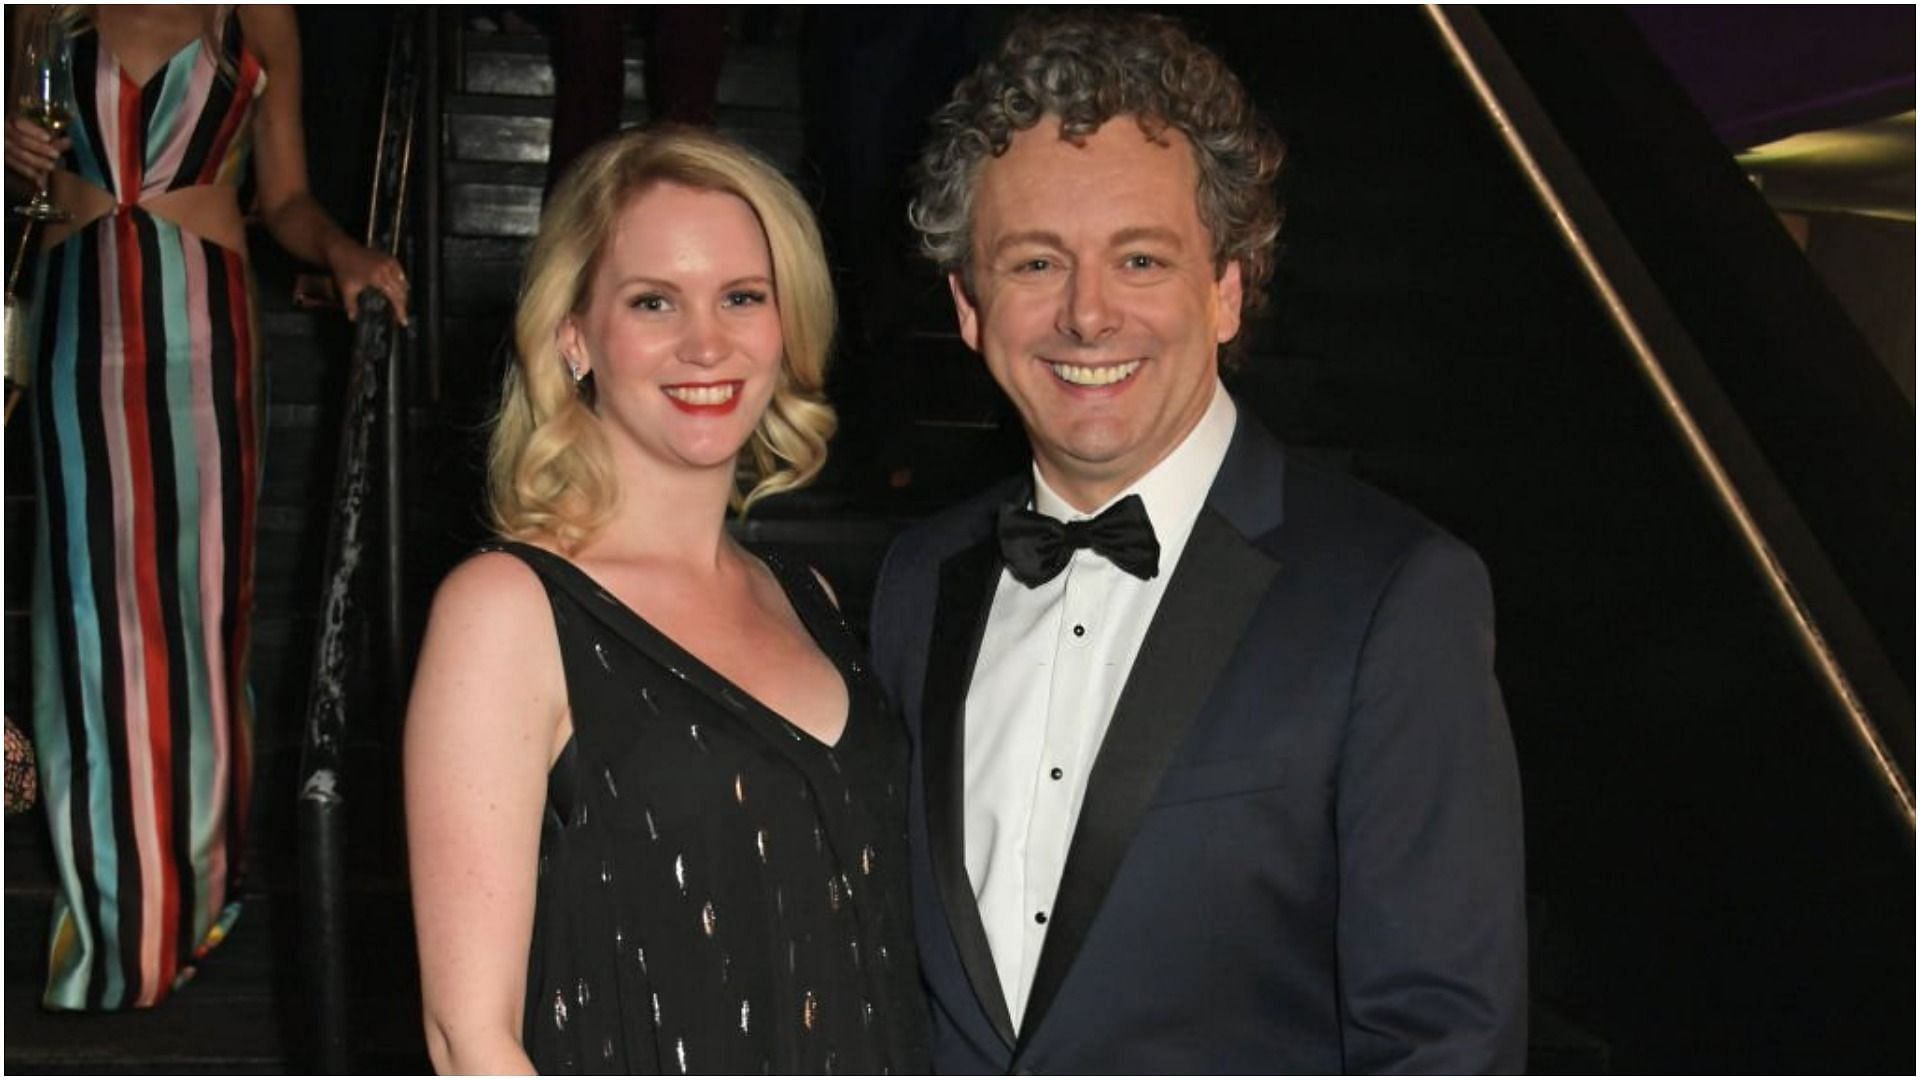 Michael Sheen and Anna Lundberg are all set to welcome their third child (Image via David M. Benett/Getty Images)